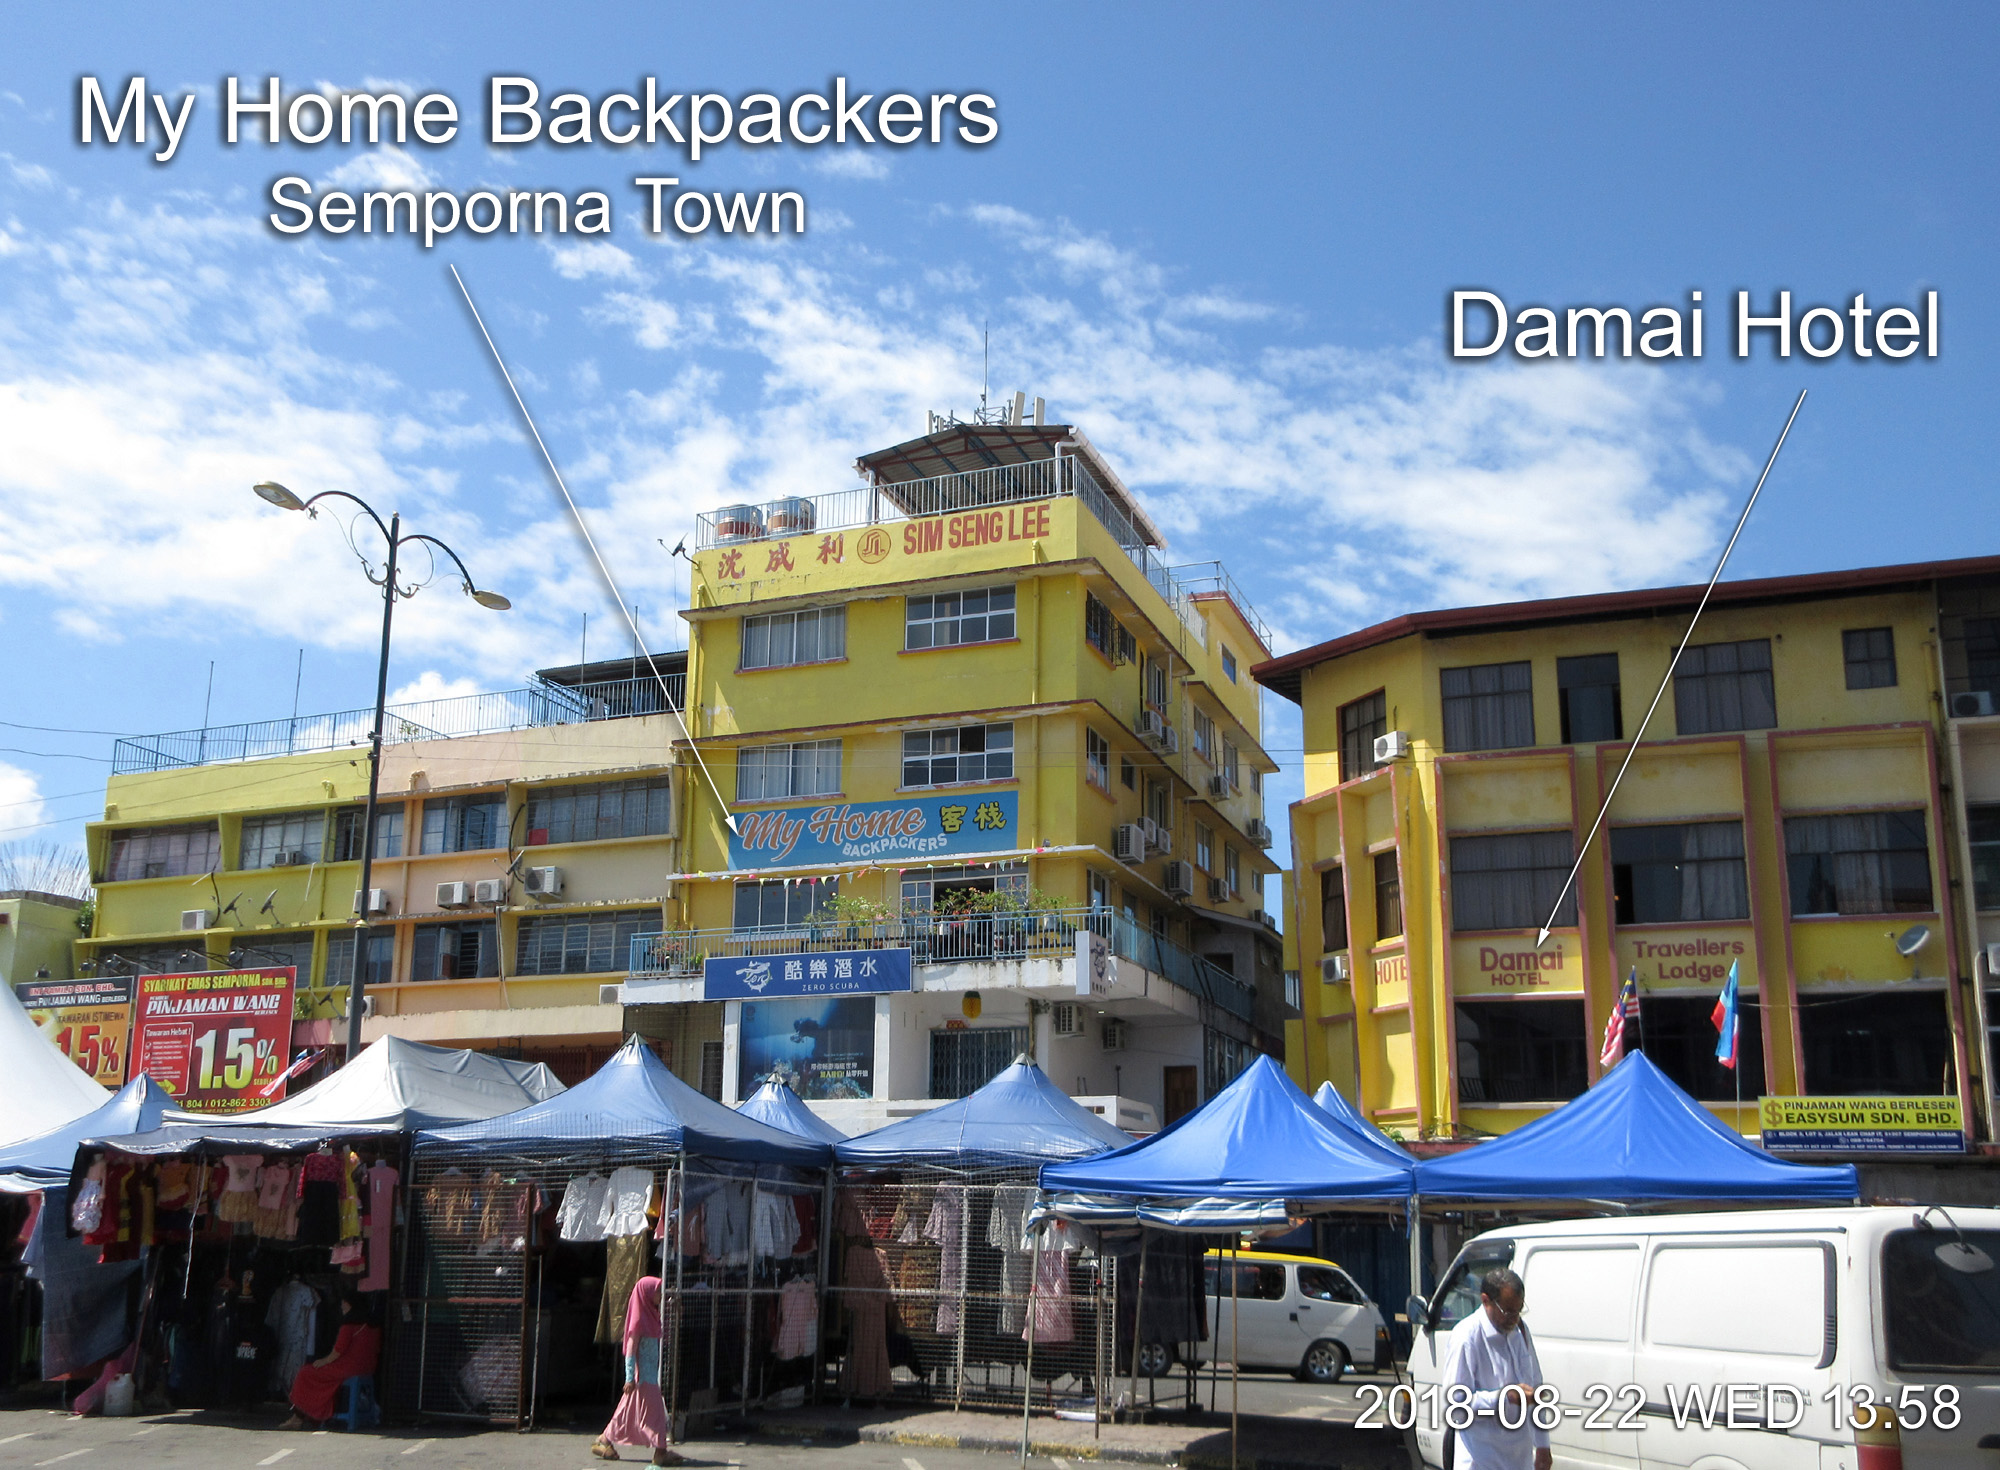 My Home Backpackers, Semporna Town